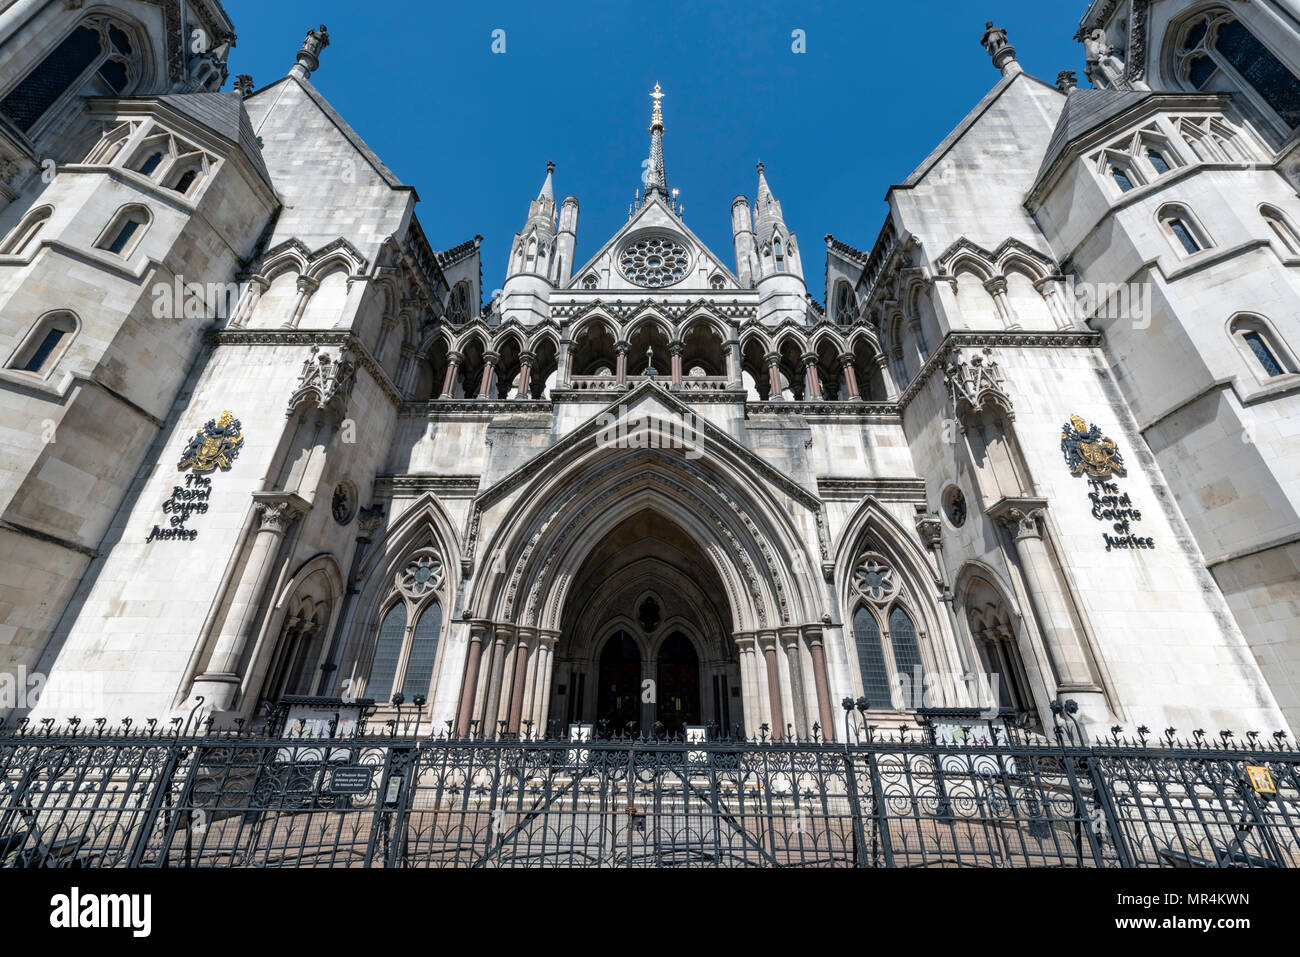 Facade of the Royal Courts of Justice on the Strand, London Stock Photo